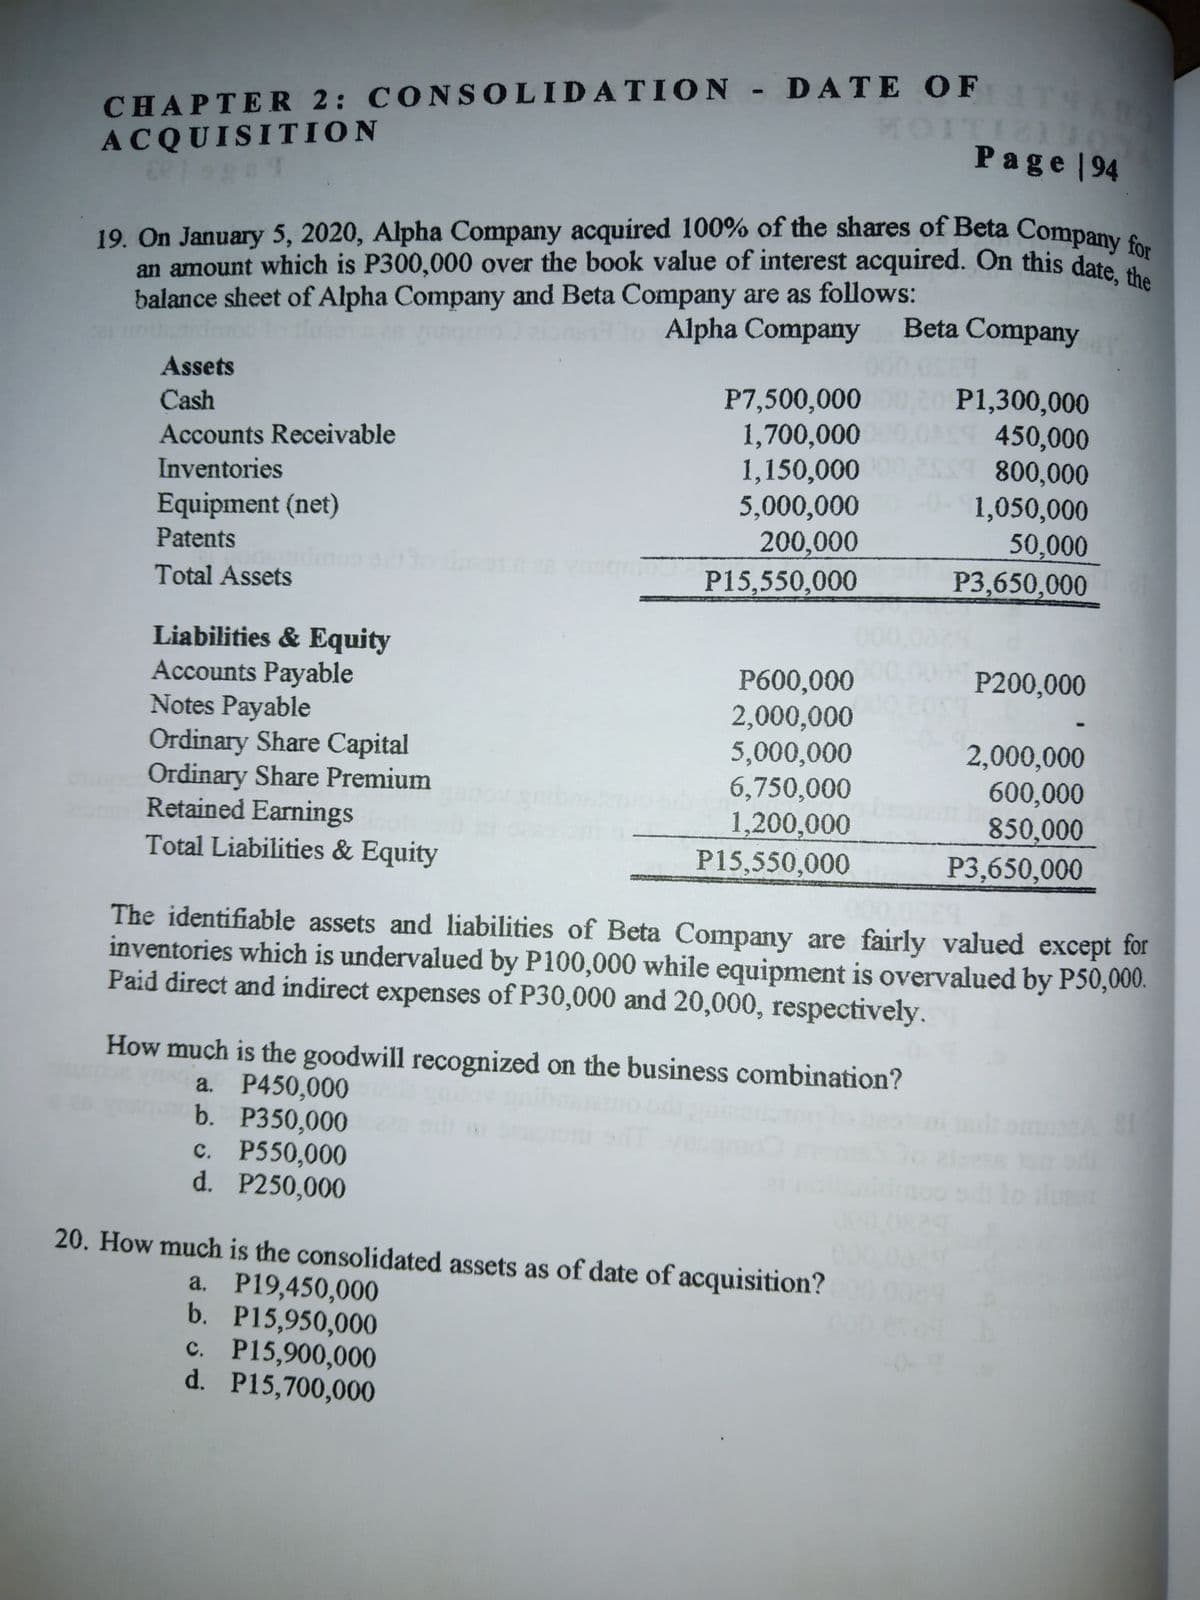 an amount which is P300,000 over the book value of interest acquired. On this date, the
19. On January 5, 2020, Alpha Company acquired 100% of the shares of Beta Company for
CHAPTER 2: CON SOLIDATION - D ATE OF
ACQUISITION
KOITIZI105
Page 194
19. On January 5, 2020, Alpha Company acquired 100% of the shares of Beta Company e
an amount which is P300,000 over the book value of interest acquired. On this date OF
balance sheet of Alpha Company and Beta Company are as follows:
Alpha Company
Beta Company
000.05E
Assets
P7,500,000 0,20 P1,300,000
450,000
800,000
-0-1,050,000
Cash
1,700,000
1,150,000
5,000,000
200,000
Accounts Receivable
Inventories
Equipment (net)
50,000
Patents
Total Assets
P15,550,000
P3,650,000
Liabilities & Equity
Accounts Payable
Notes Payable
Ordinary Share Capital
Ordinary Share Premium
Retained Earnings
Total Liabilities & Equity
P200,000
P600,000
2,000,000
5,000,000
6,750,000
1,200,000
P15,550,000
2,000,000
600,000
850,000
P3,650,000
The identifiable assets and liabilities of Beta Company are fairly valued except for
inventories which is undervalued by P100,000 while equipment is overvalued by P50,000.
Paid direct and indirect expenses of P30,000 and 20,000, respectively.
How much is the goodwill recognized on the business combination?
a. P450,000
b. P350,000
c. P550,000
d. P250,000
20. How much is the consolidated assets as of date of acquisition?
a. P19,450,000
b. P15,950,000
c. P15,900,000
d. P15,700,000
